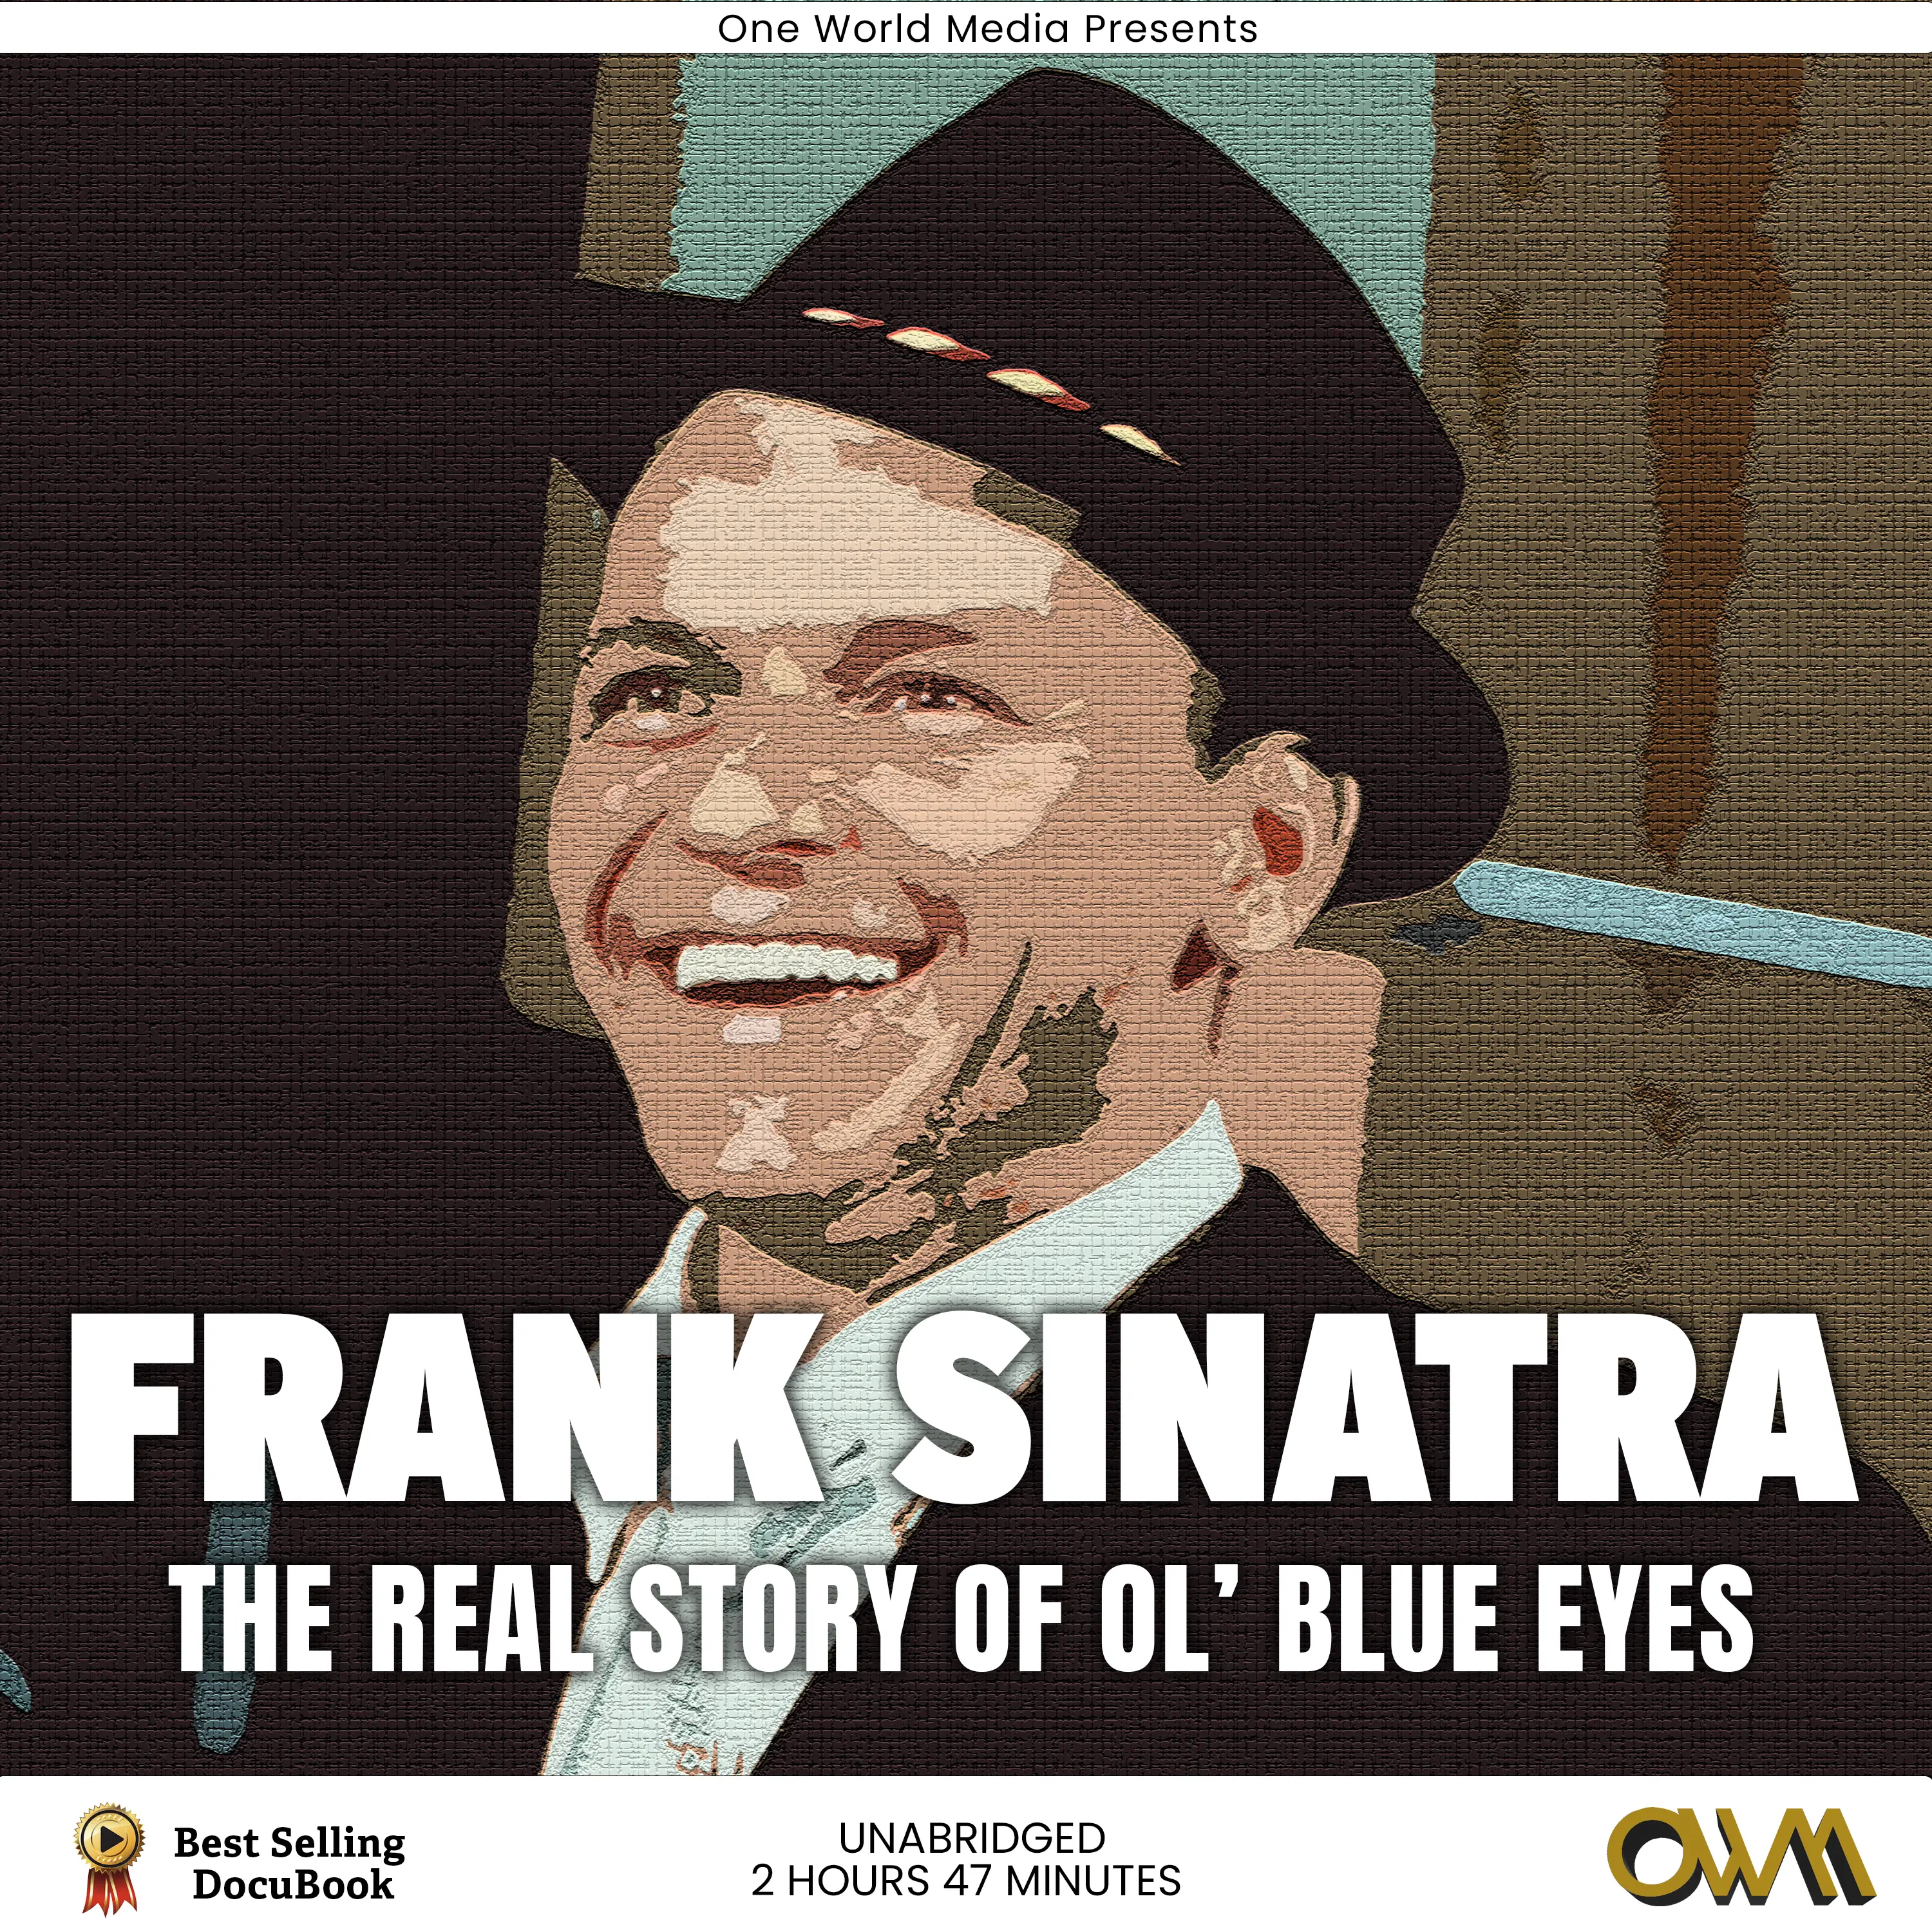 Frank Sinatra - The Real Story of Ol' Blue Eyes